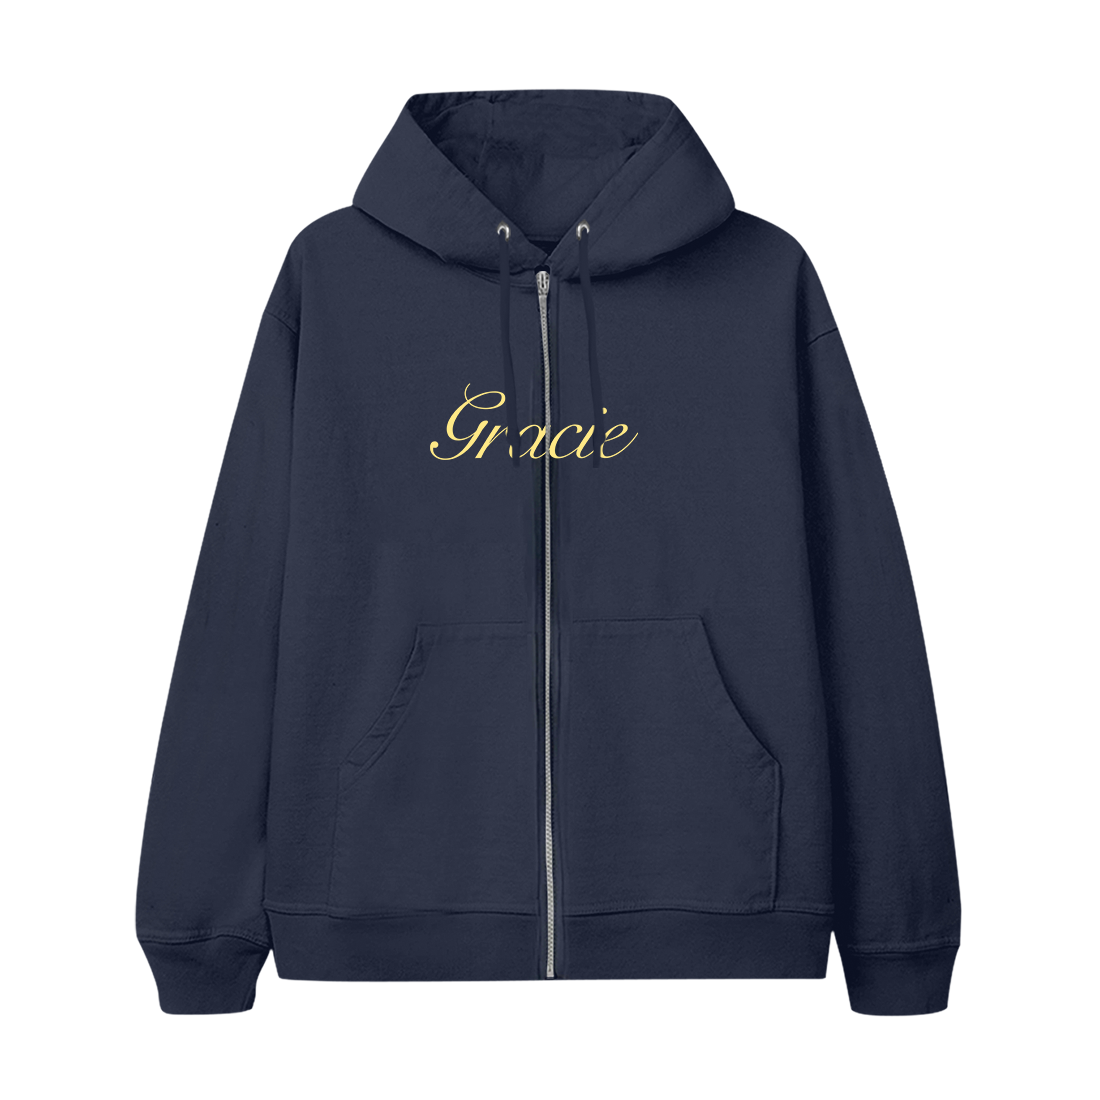 I Love you I’m Sorry Zip-Hoodie Front